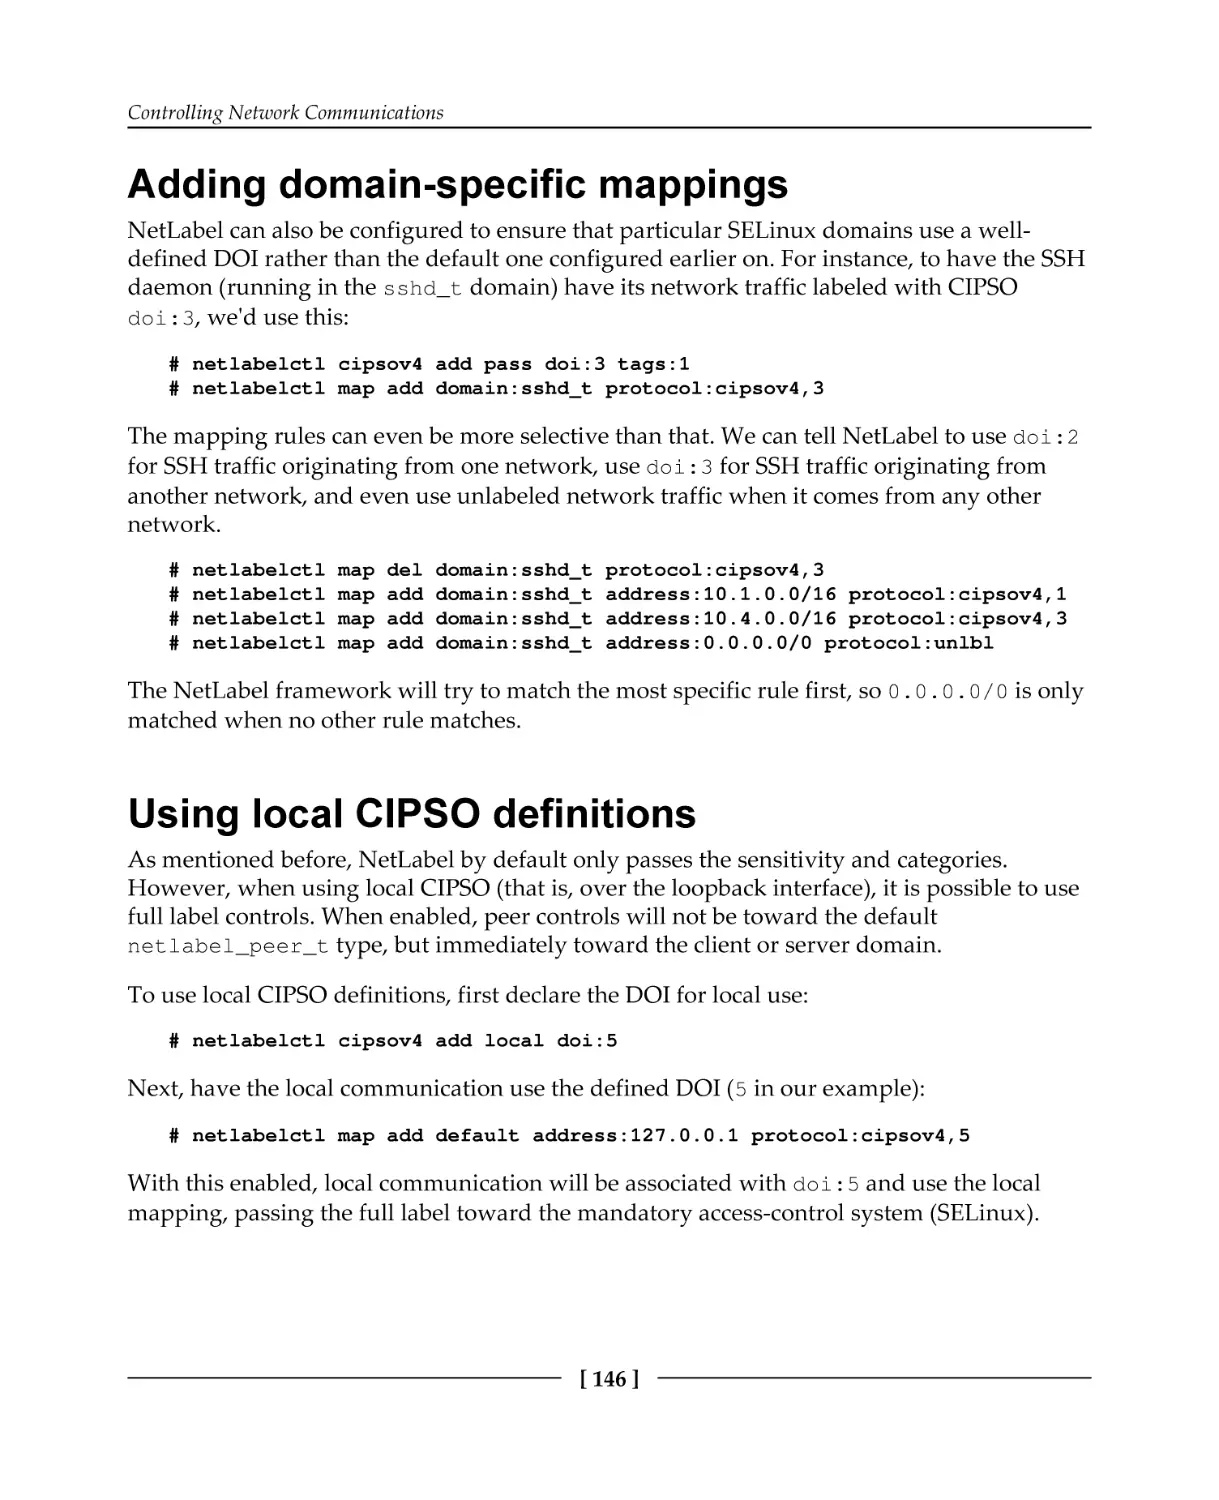 Adding domain-specific mappings
Using local CIPSO definitions